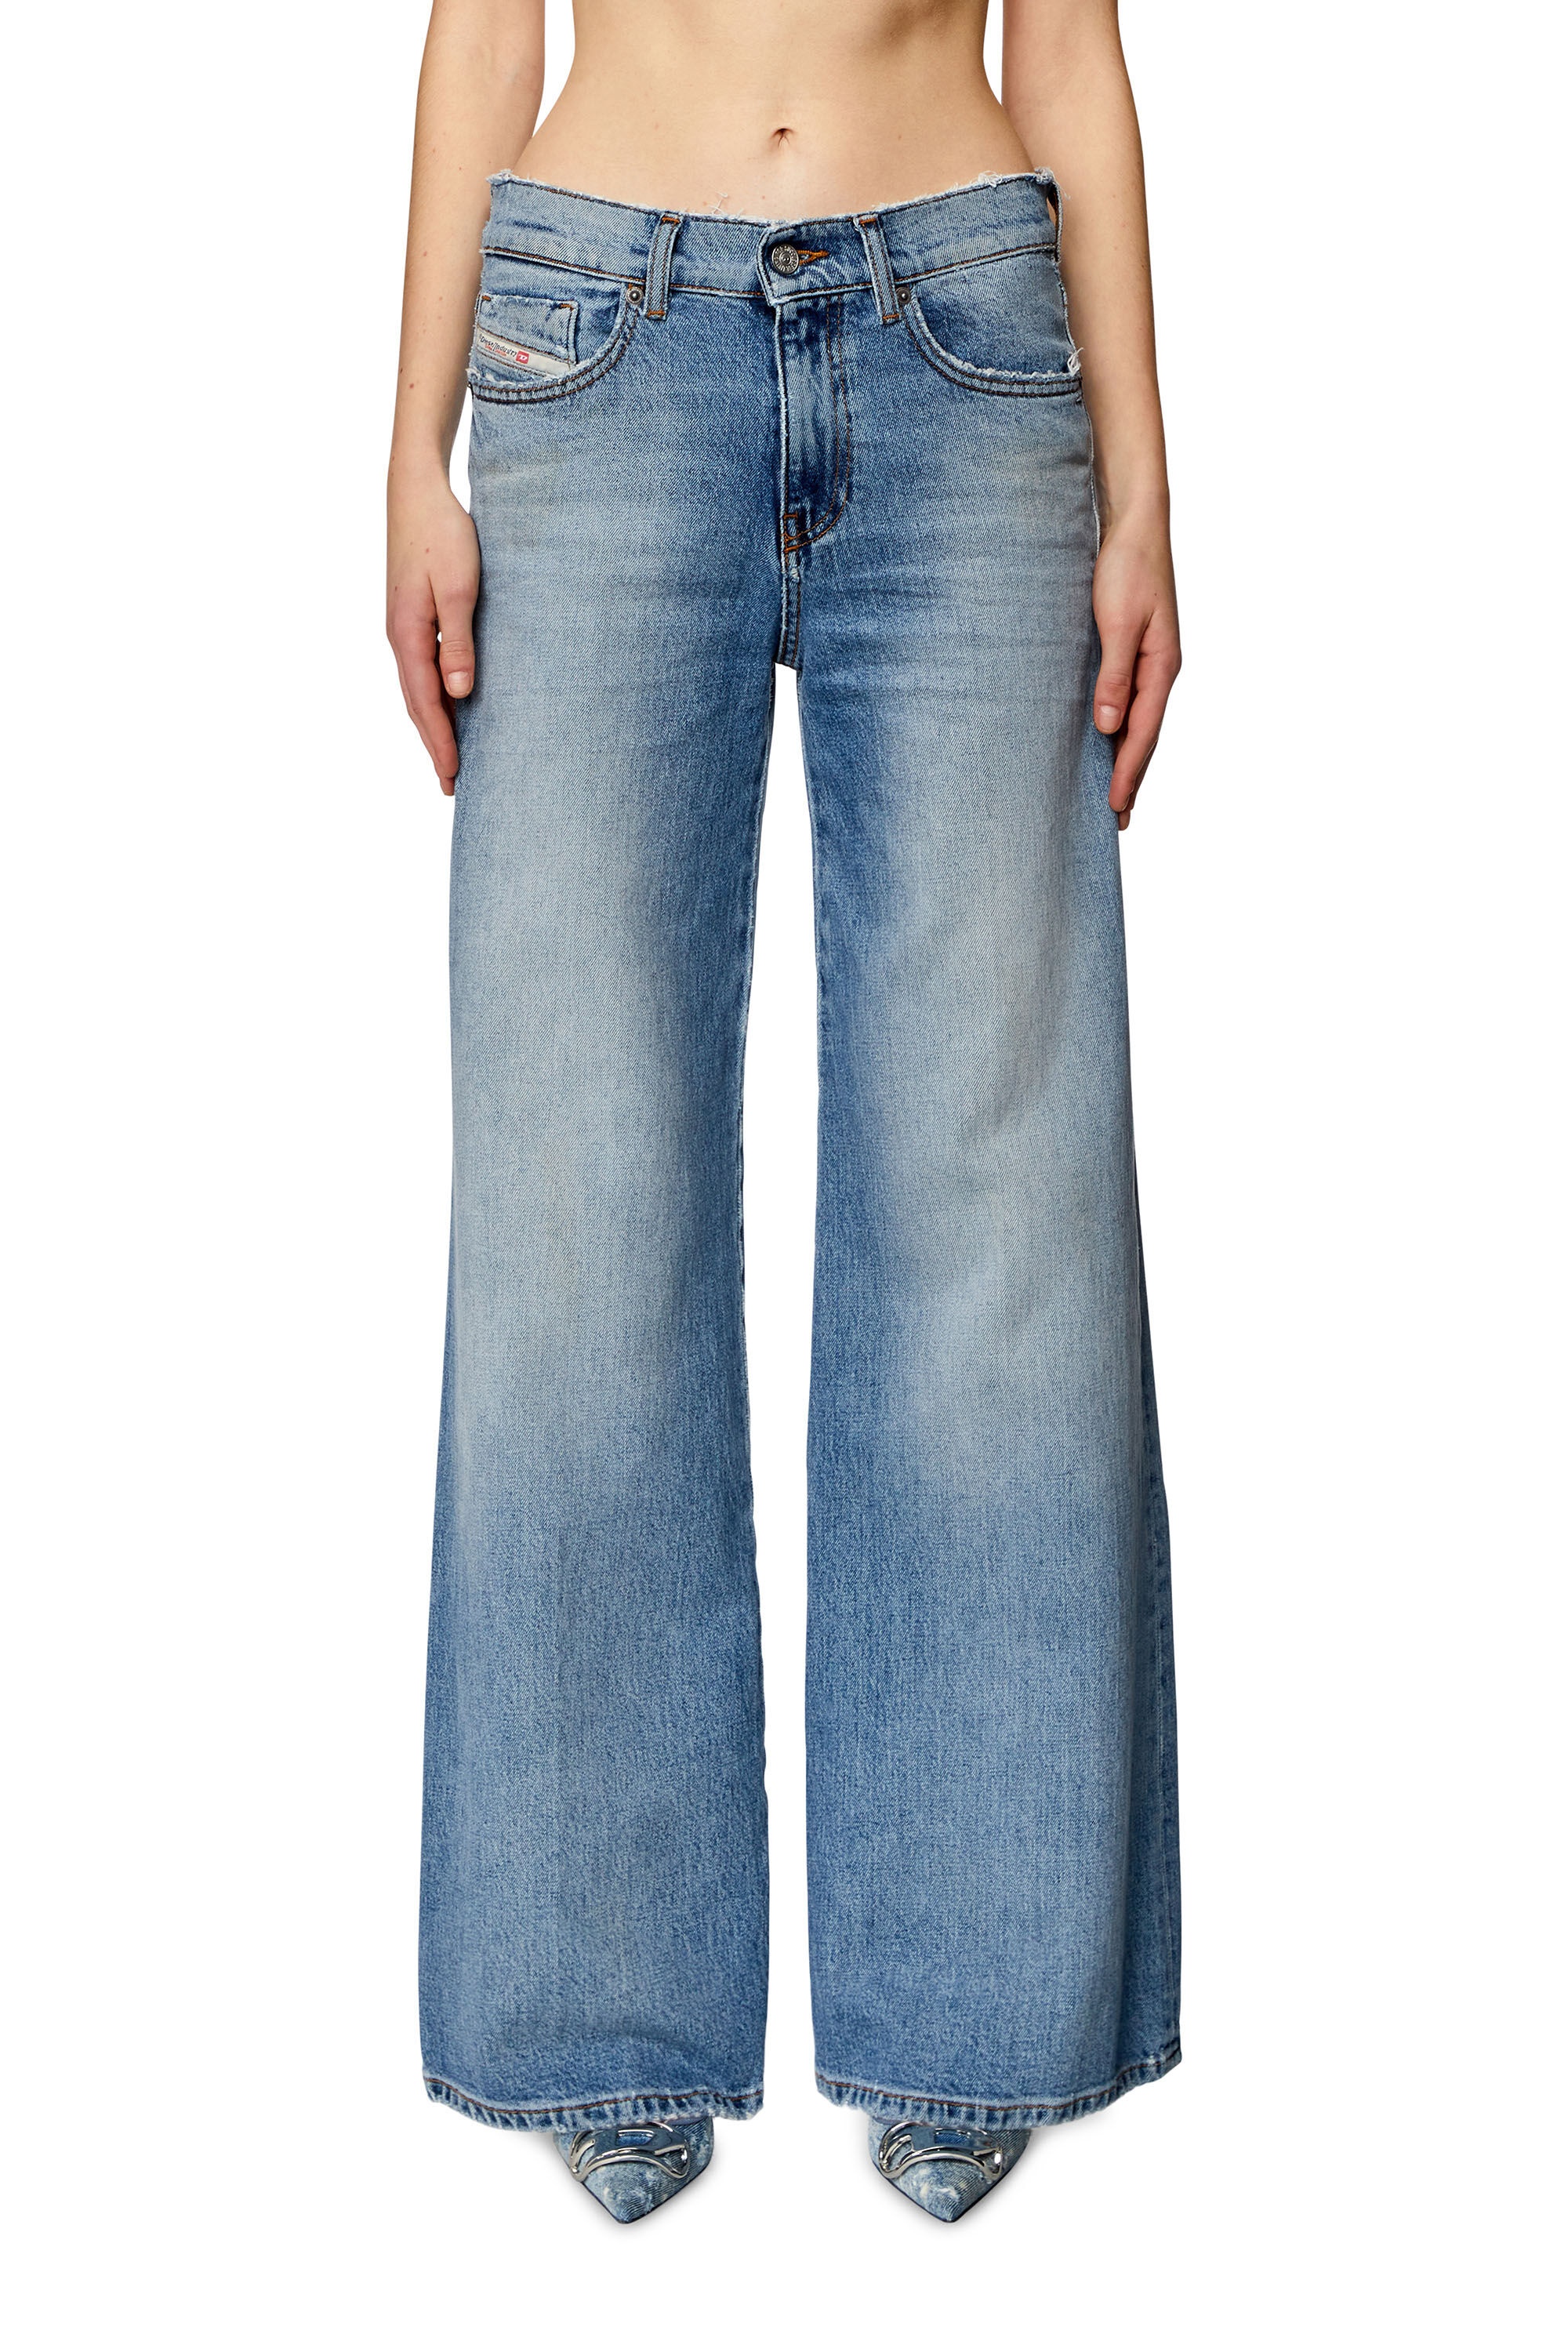 BOOTCUT AND FLARE JEANS 1978 D-AKEMI 0DQAD - 3